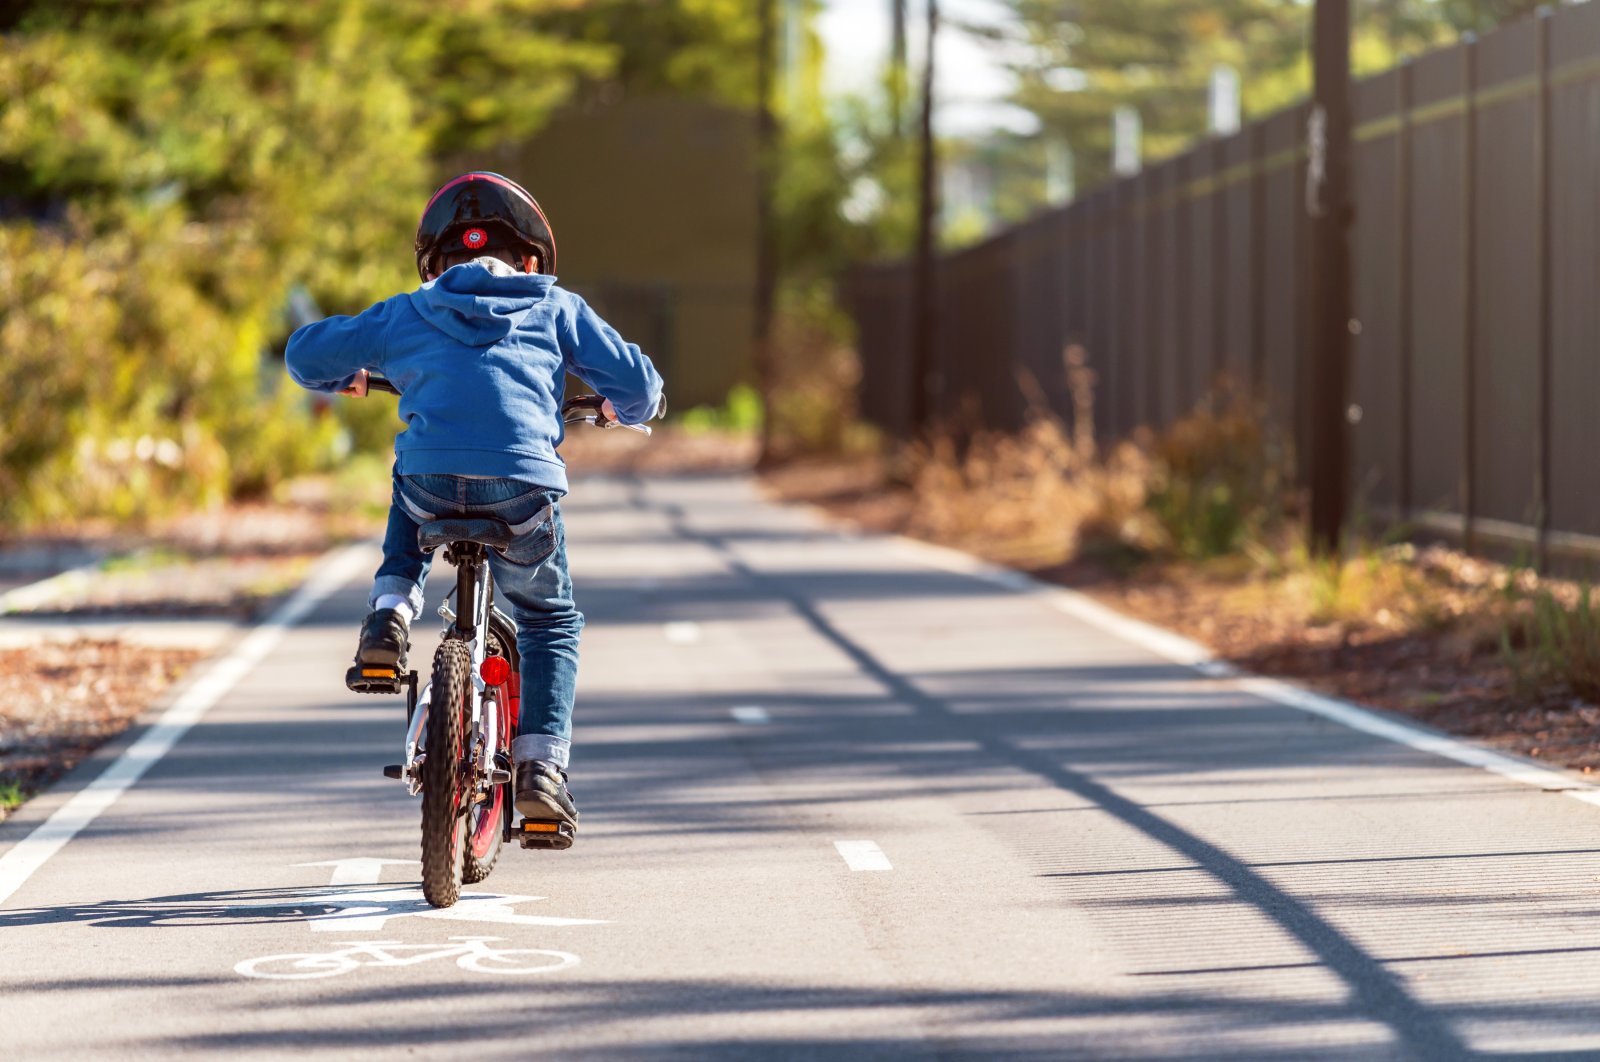 A boy riding his bicycle on the bike lane. (Shutterstock Photo)